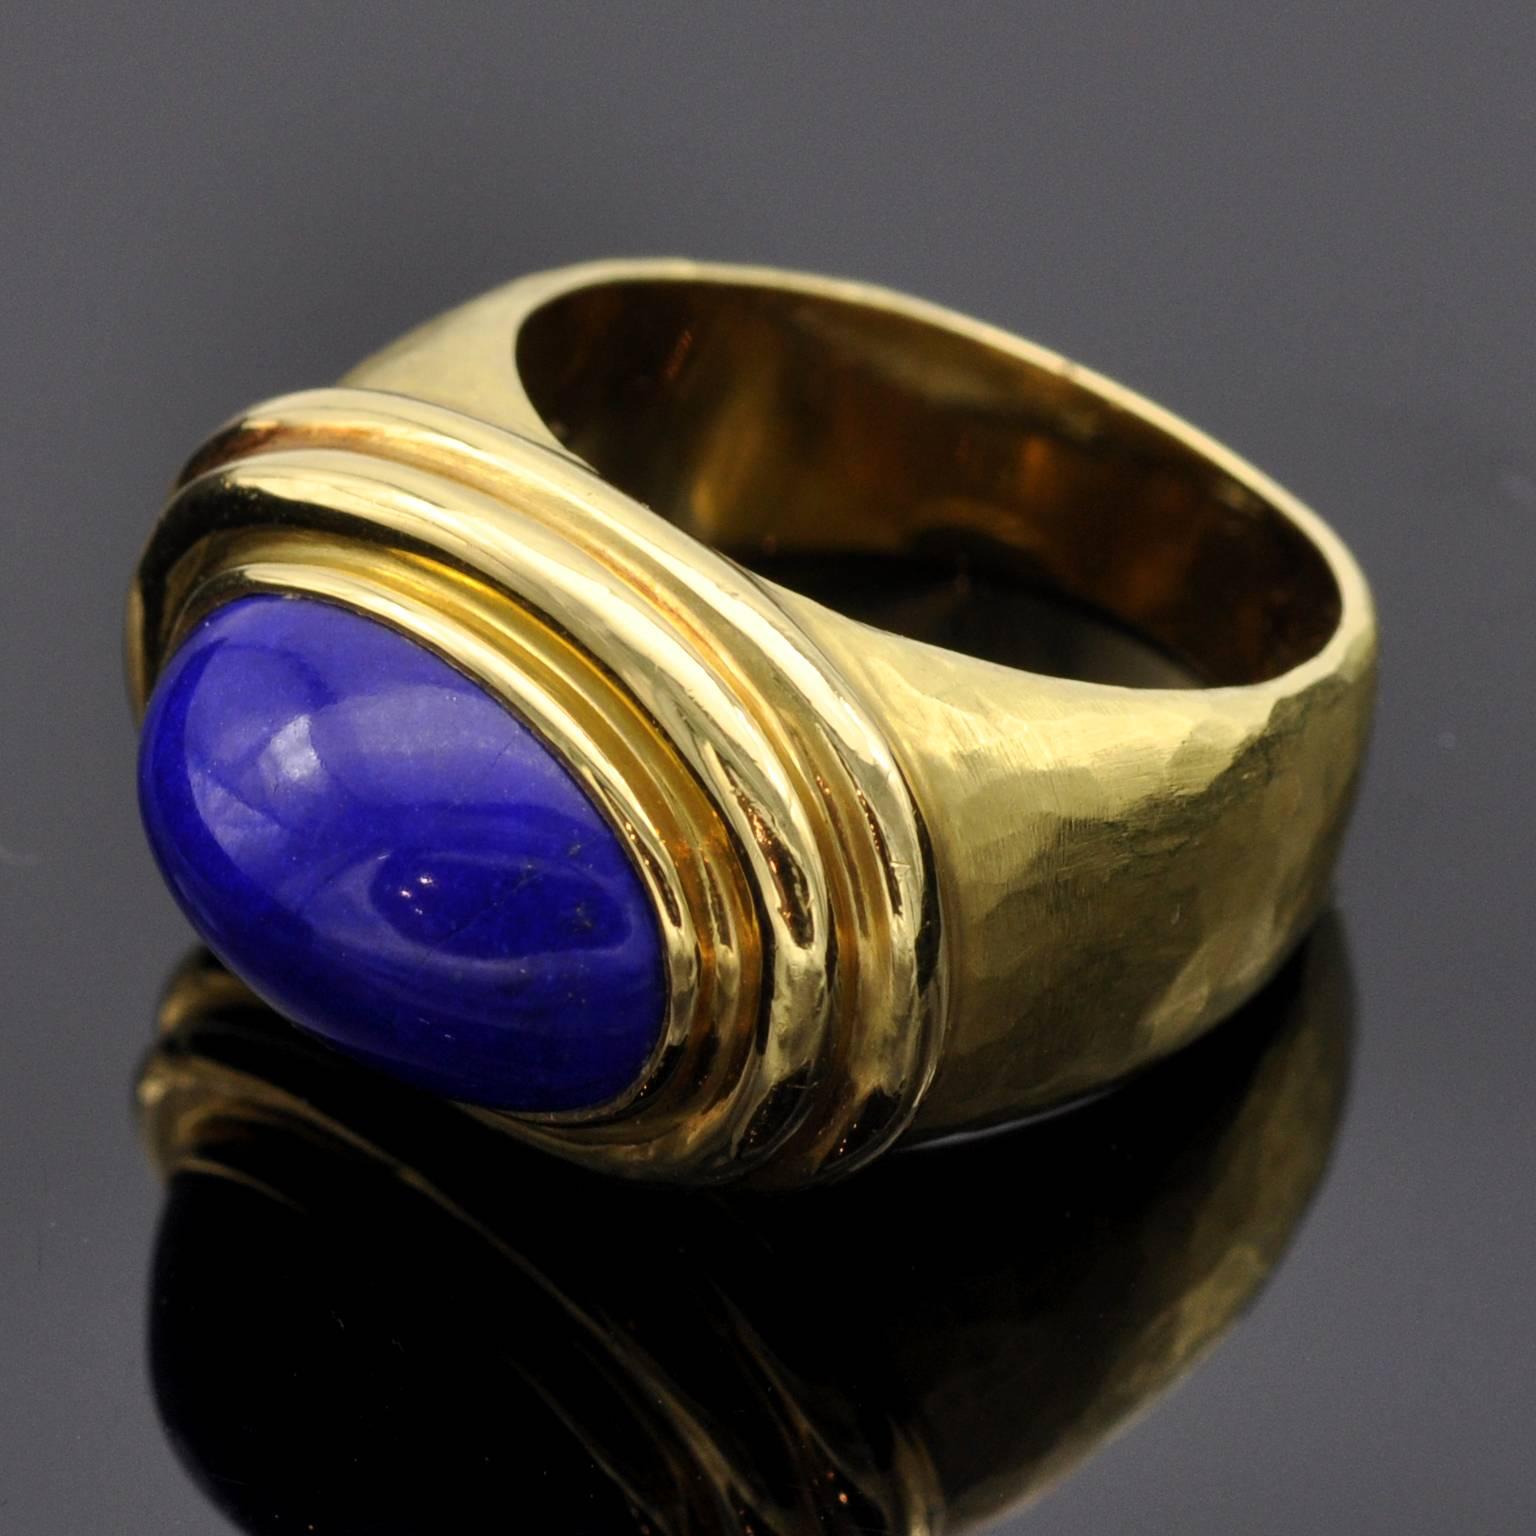 Greek Revival Hammered Gold and Lapis Lazuli Ring